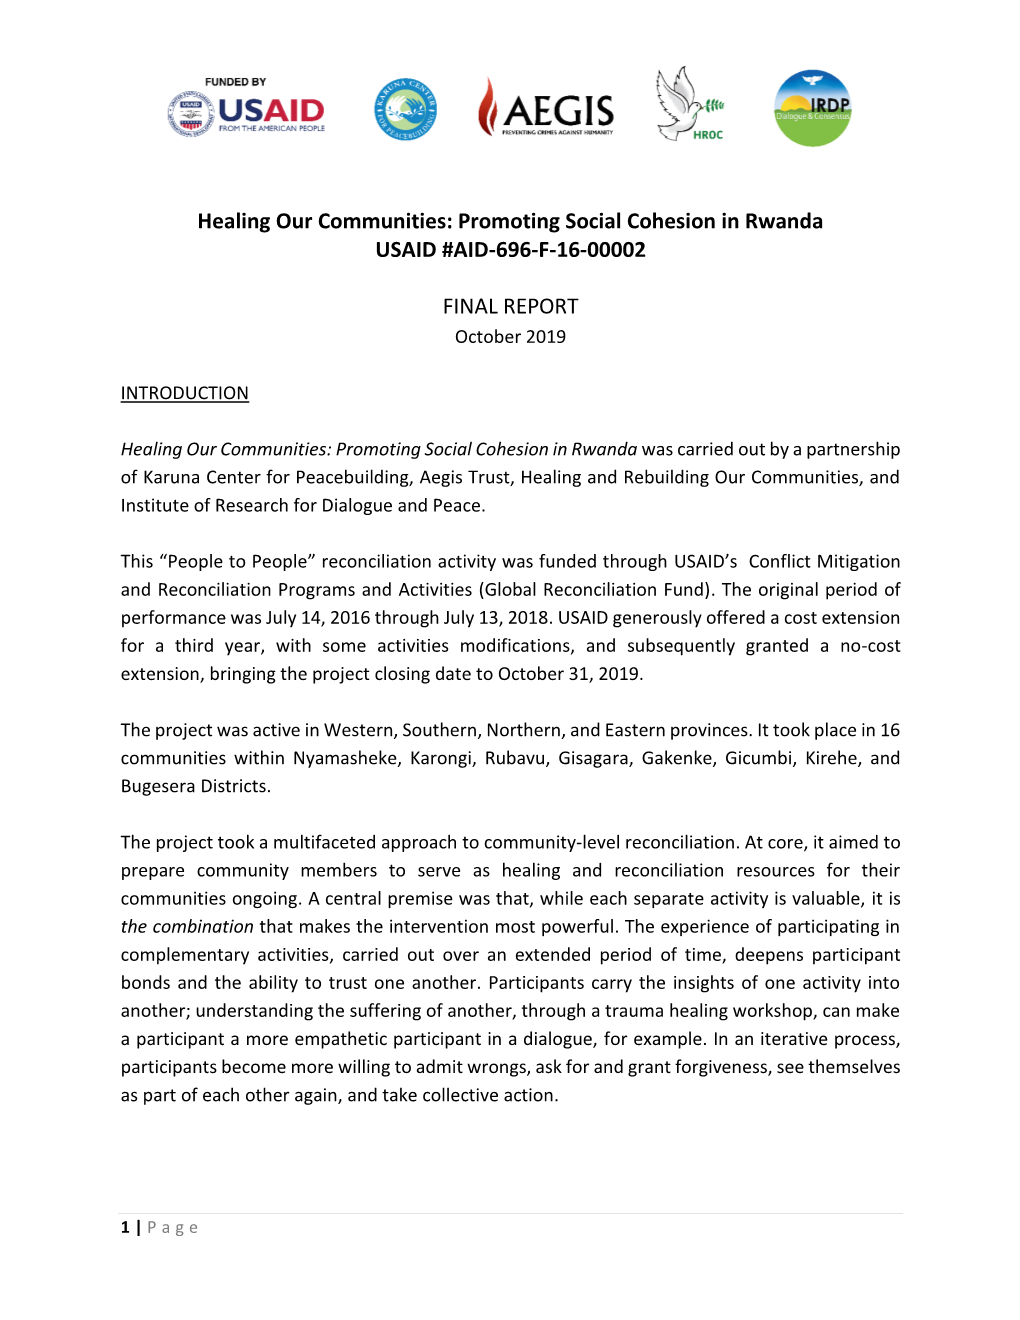 Healing Our Communities: Promoting Social Cohesion in Rwanda USAID #AID-696-F-16-00002